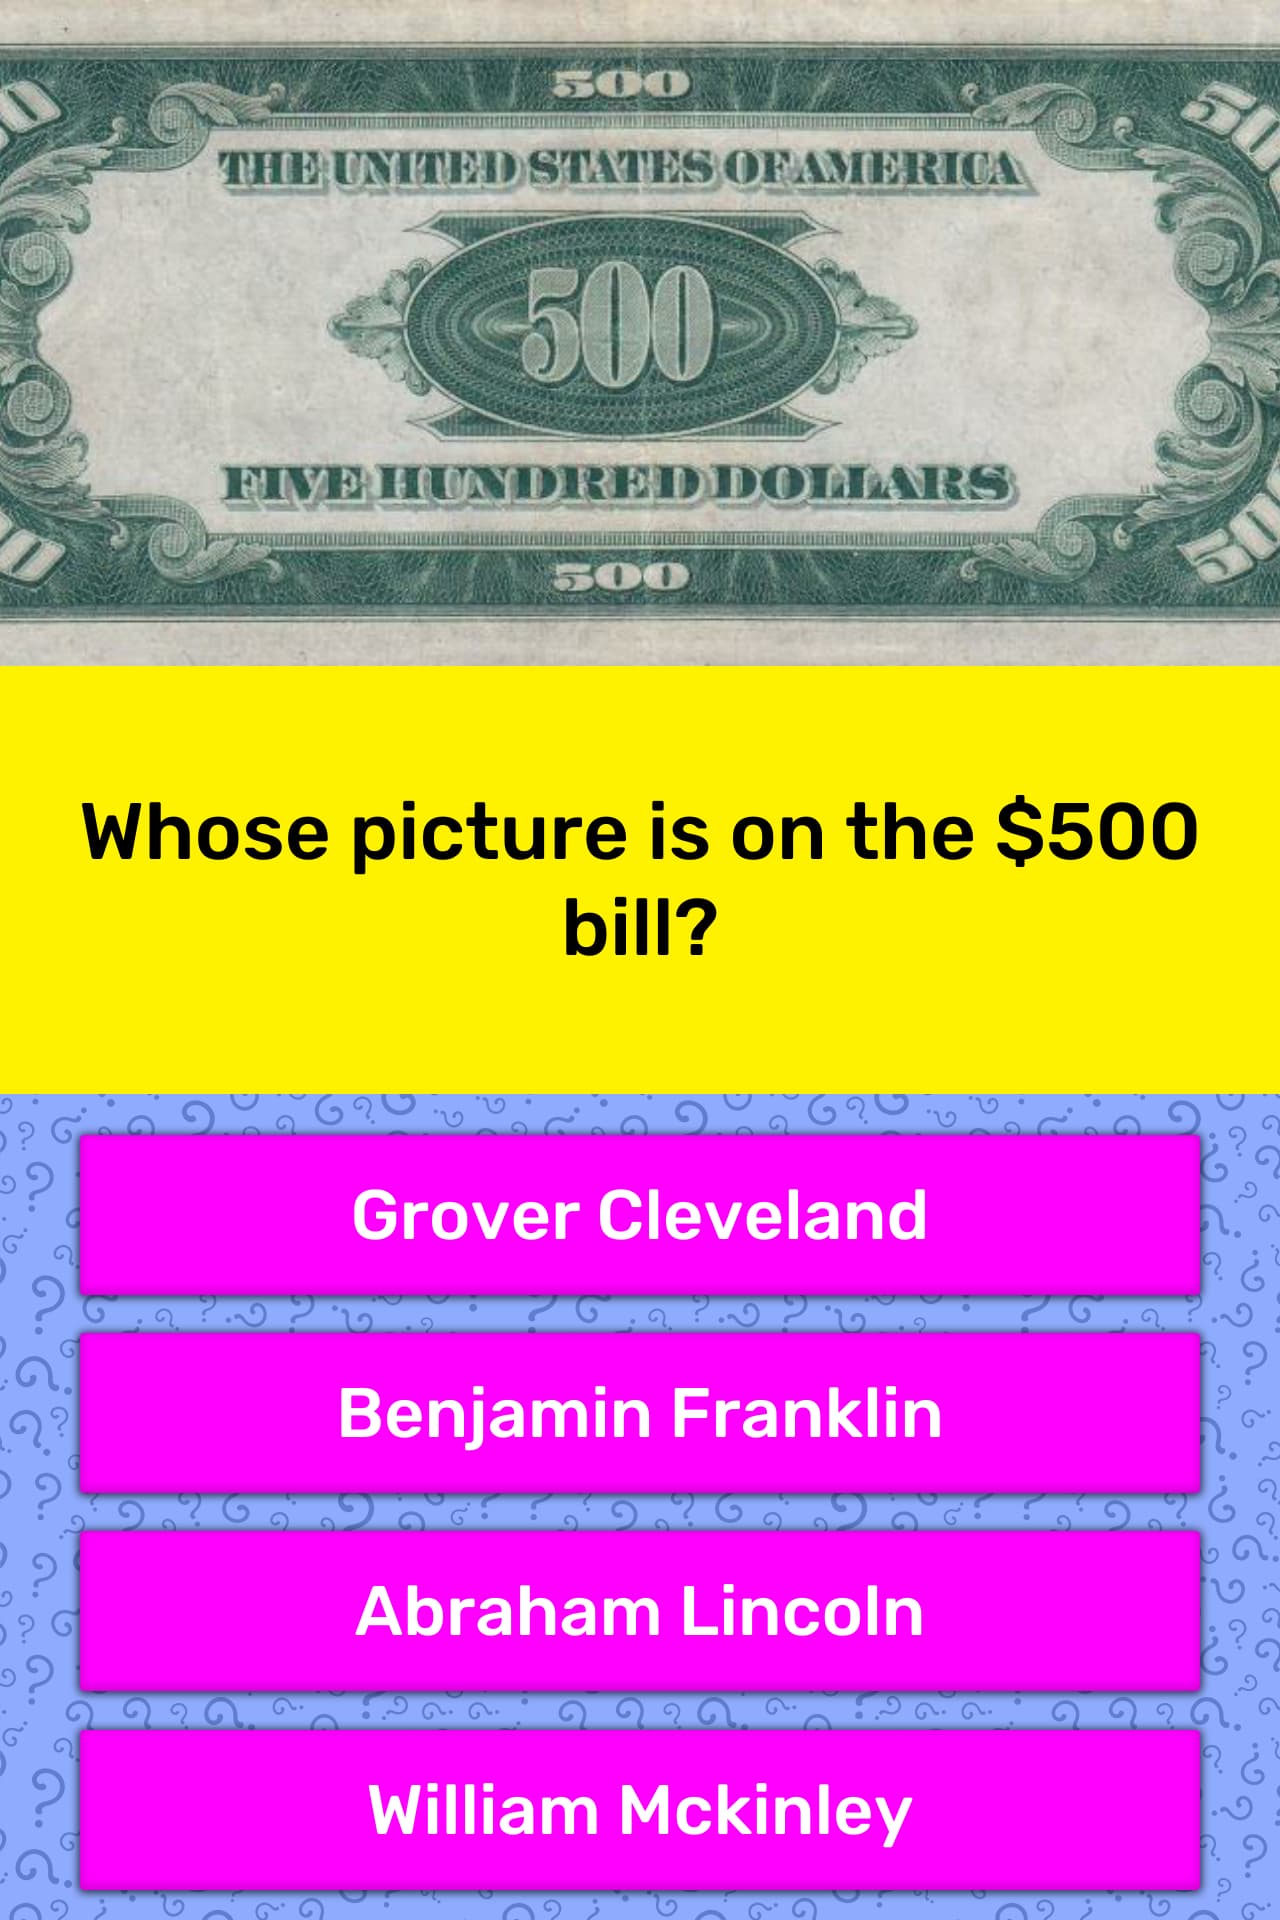 Whose picture is on the $500 bill? | Trivia Answers | QuizzClub